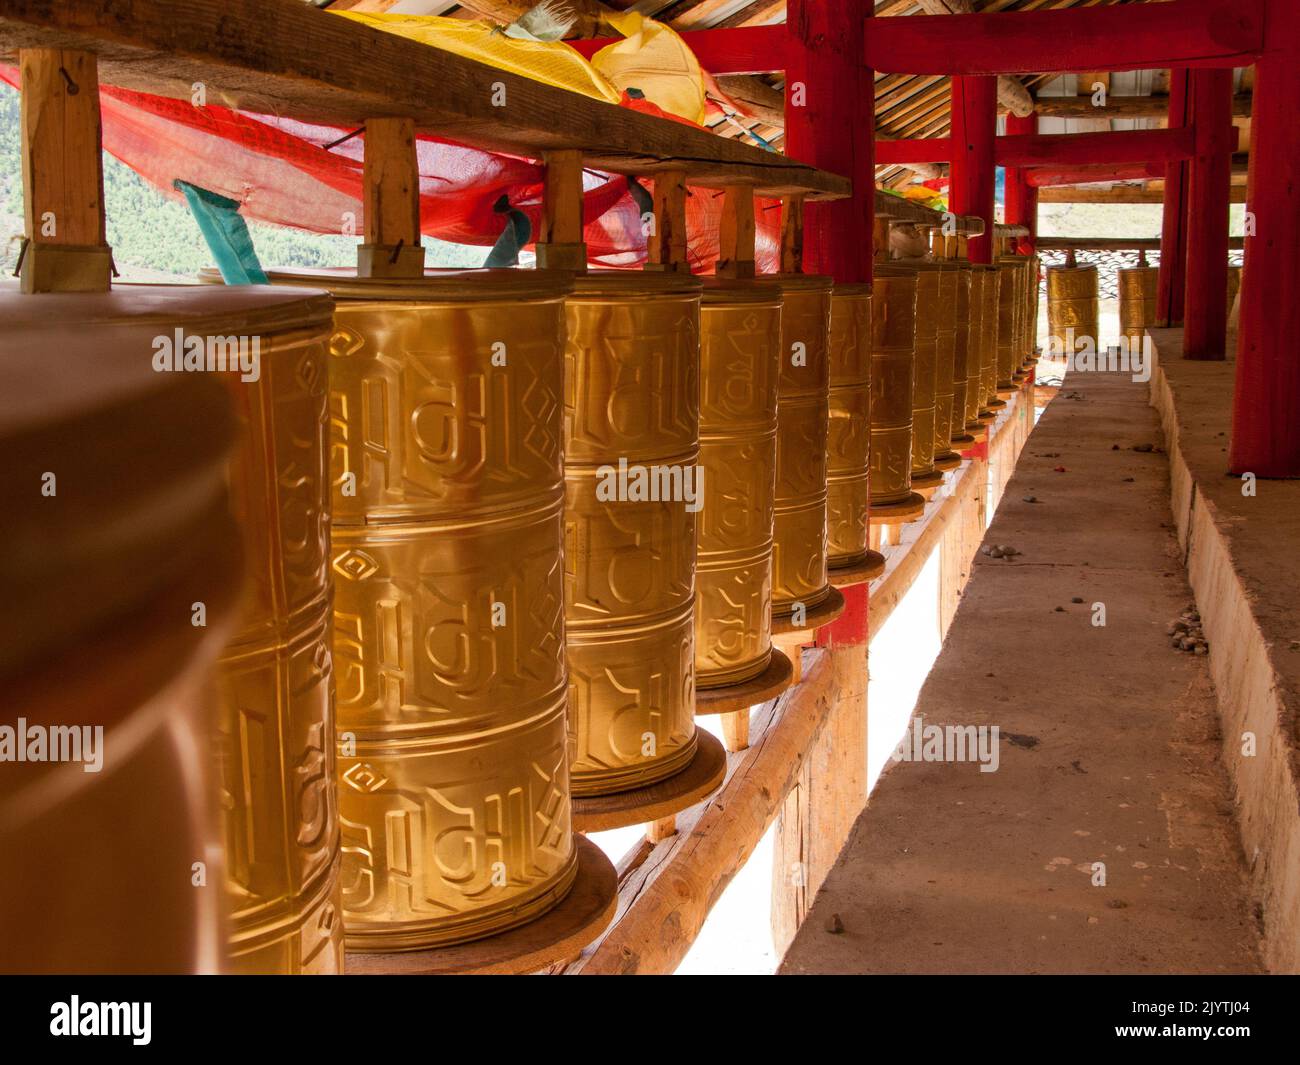 Buddhist prayer wheels made from metal and used to practise Tibetan Buddhism in China, at a local temple in a village outside Songpan ancient town in northern Sichuan province, China. PRC. (126) Stock Photo